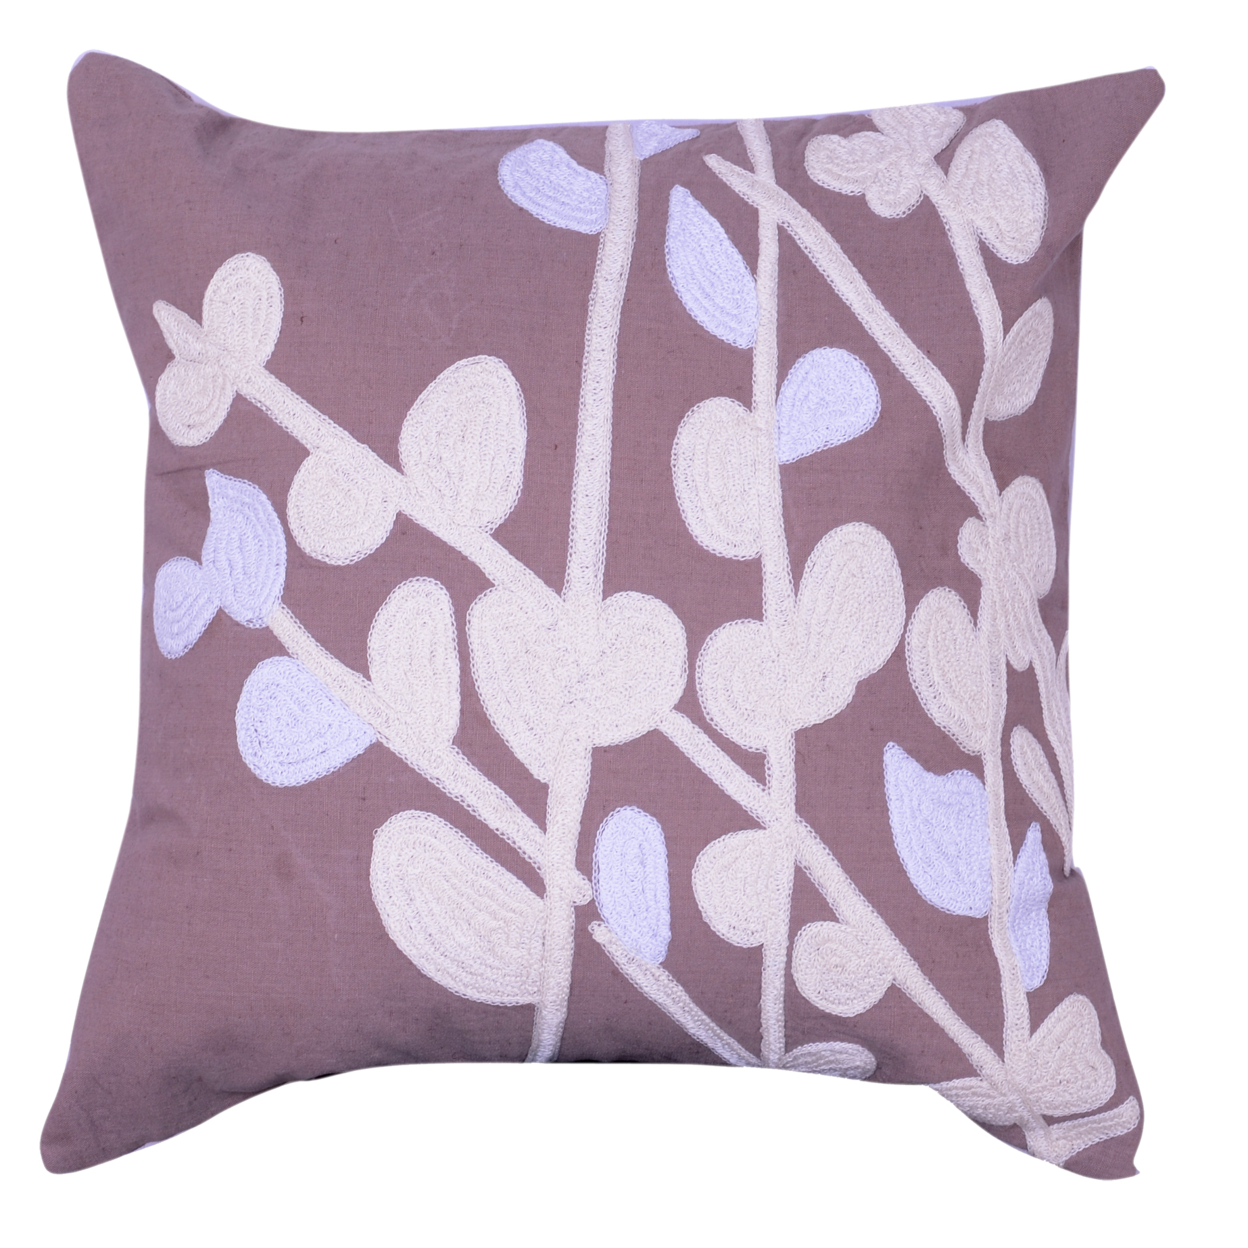 18 X 18 Inch Cotton Pillow With Stem And Leaf Embroidery, Taupe Brown And White- Saltoro Sherpi